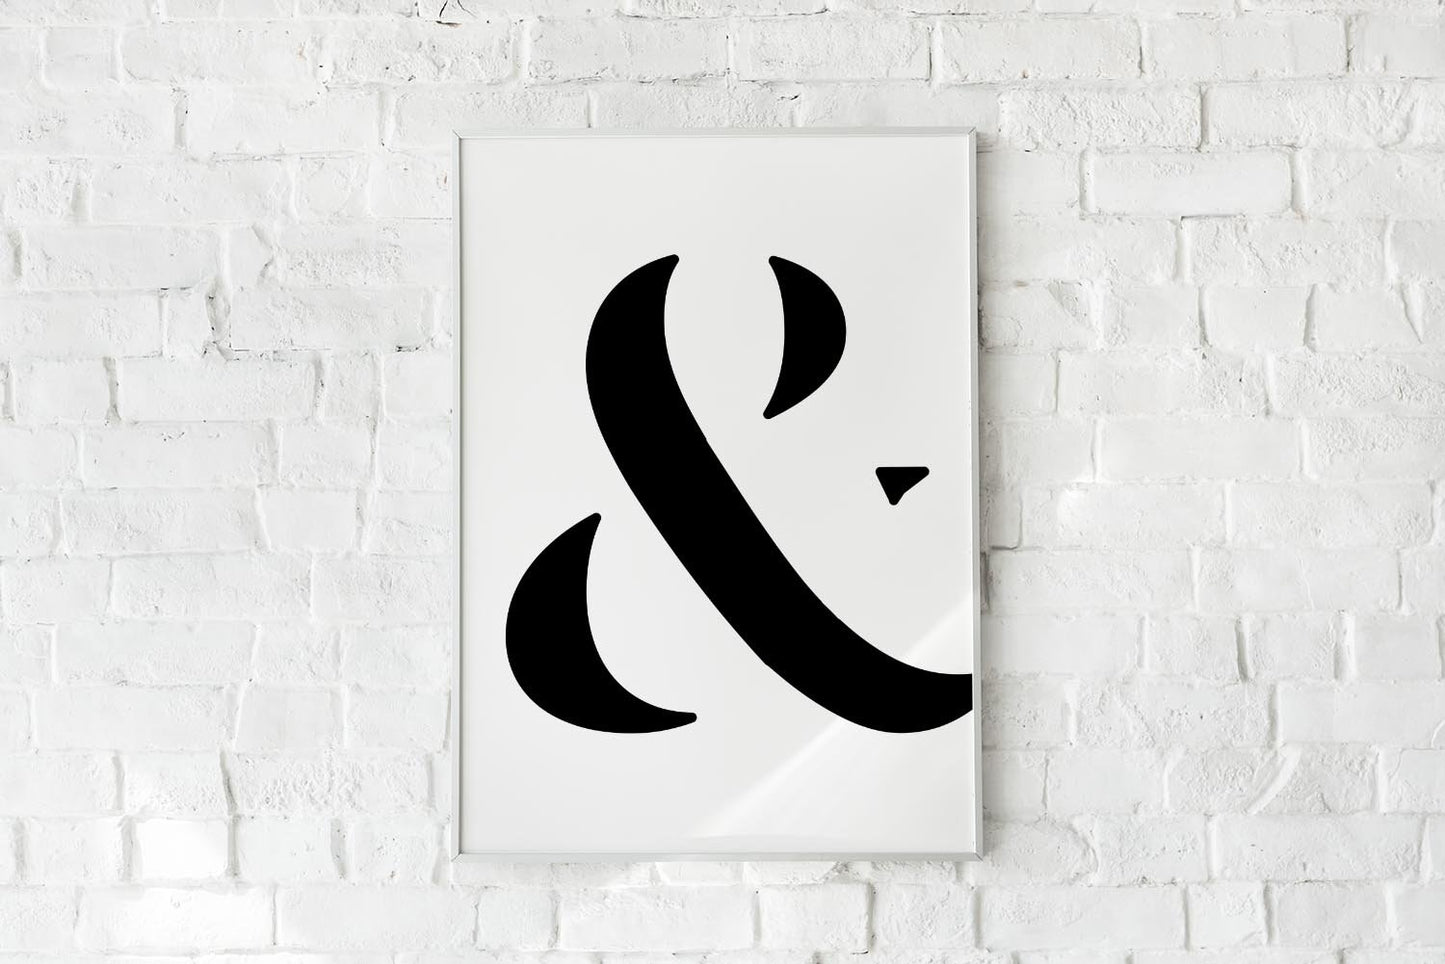 & and White Art Poster